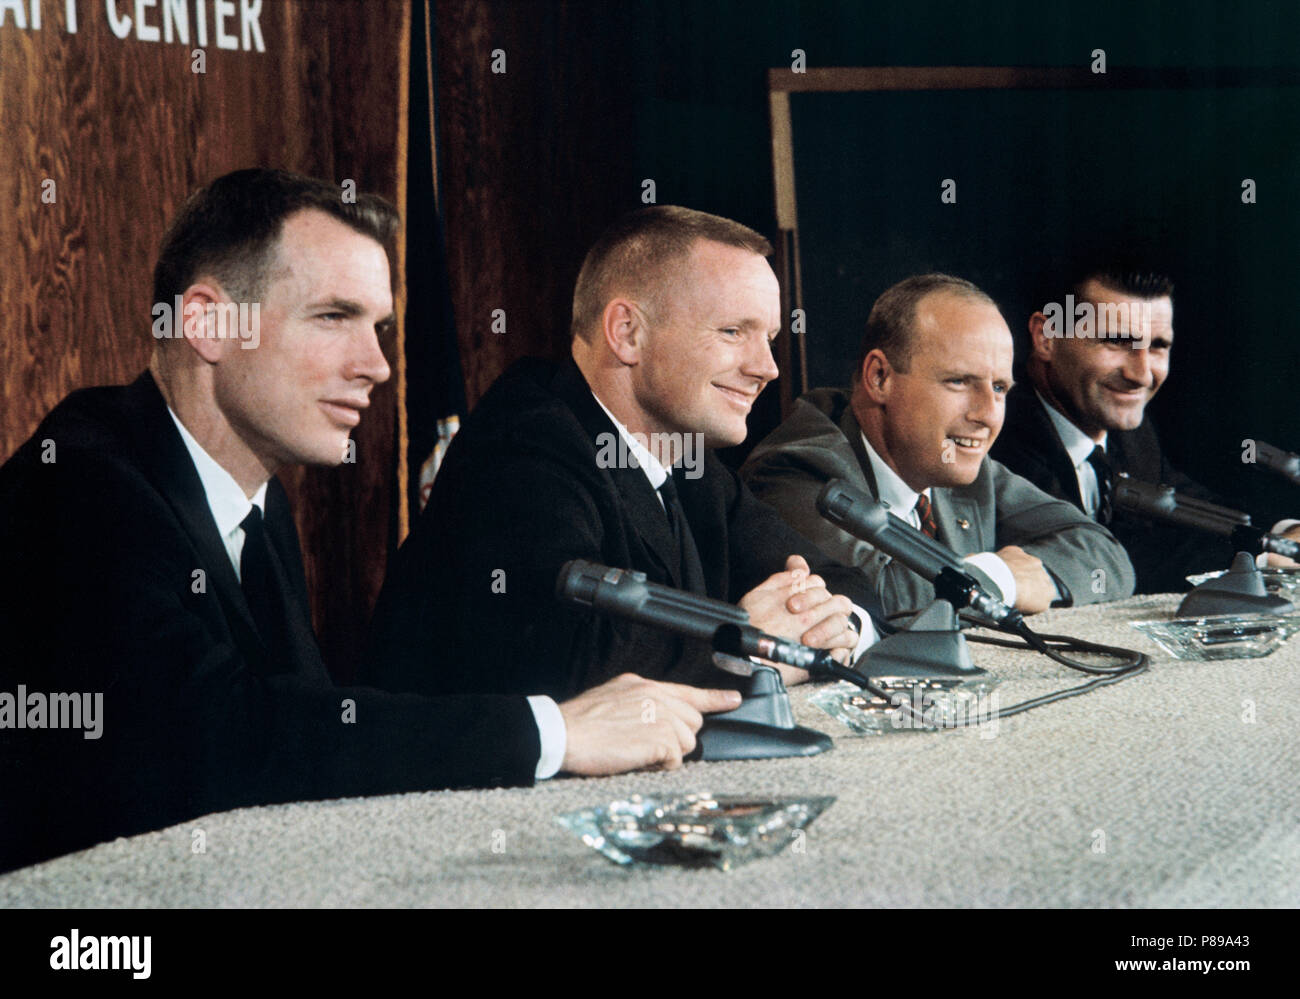 Gemini-8 prime and backup crews during press conference. L to R are astronauts David R. Scott, Neil A. Armstrong,  Charles Conrad Jr.,  and Richard F. Gordon Jr. Stock Photo